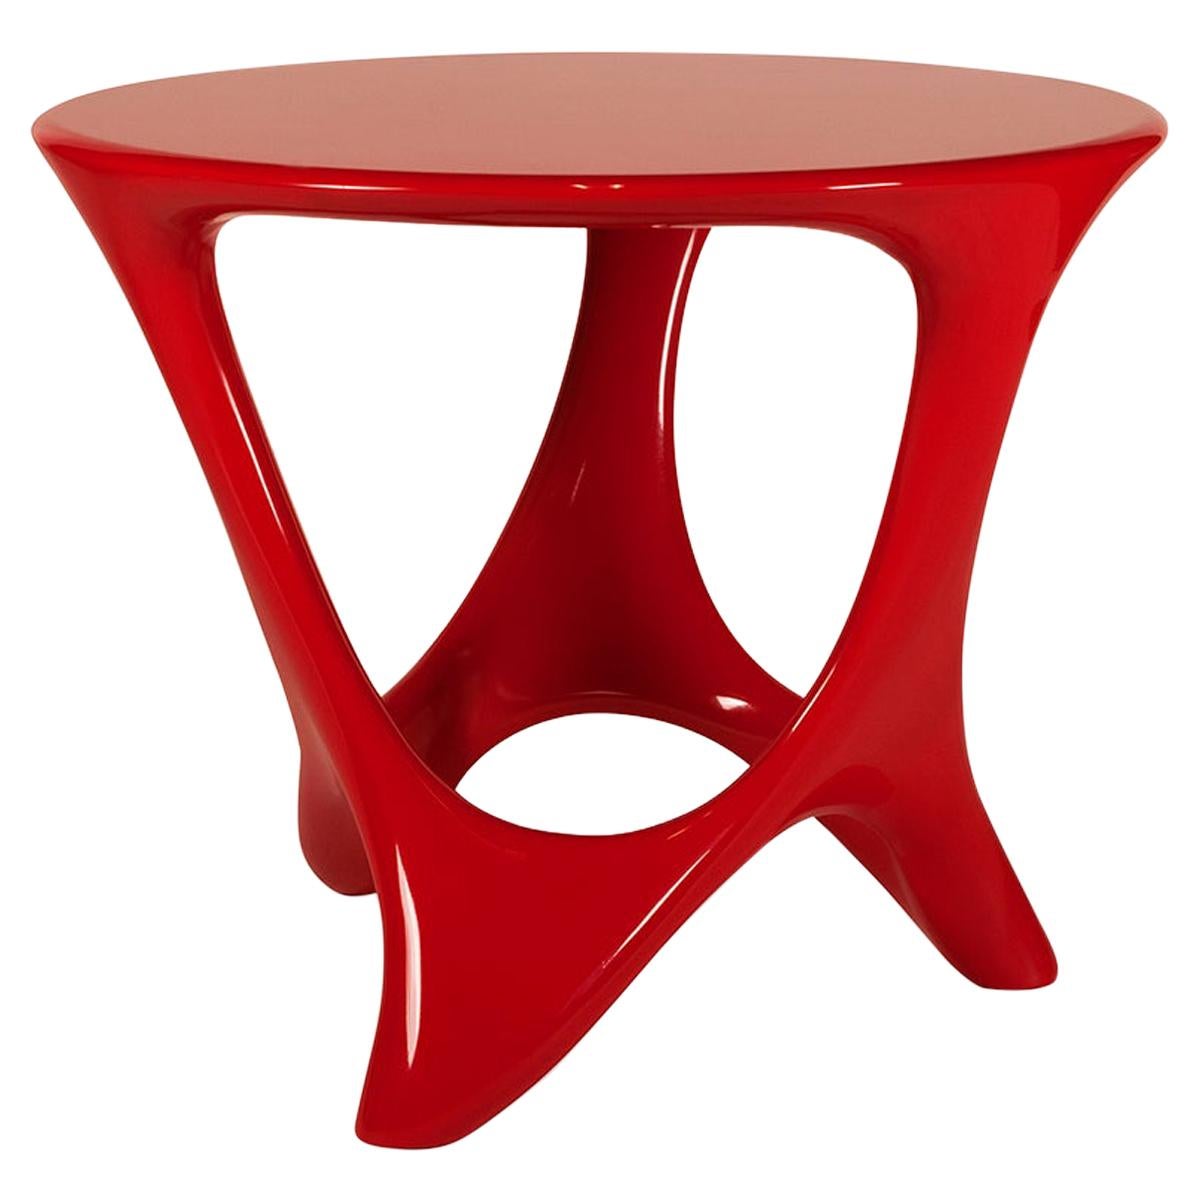 Amorph Alamos Central Table Red Lacquer 